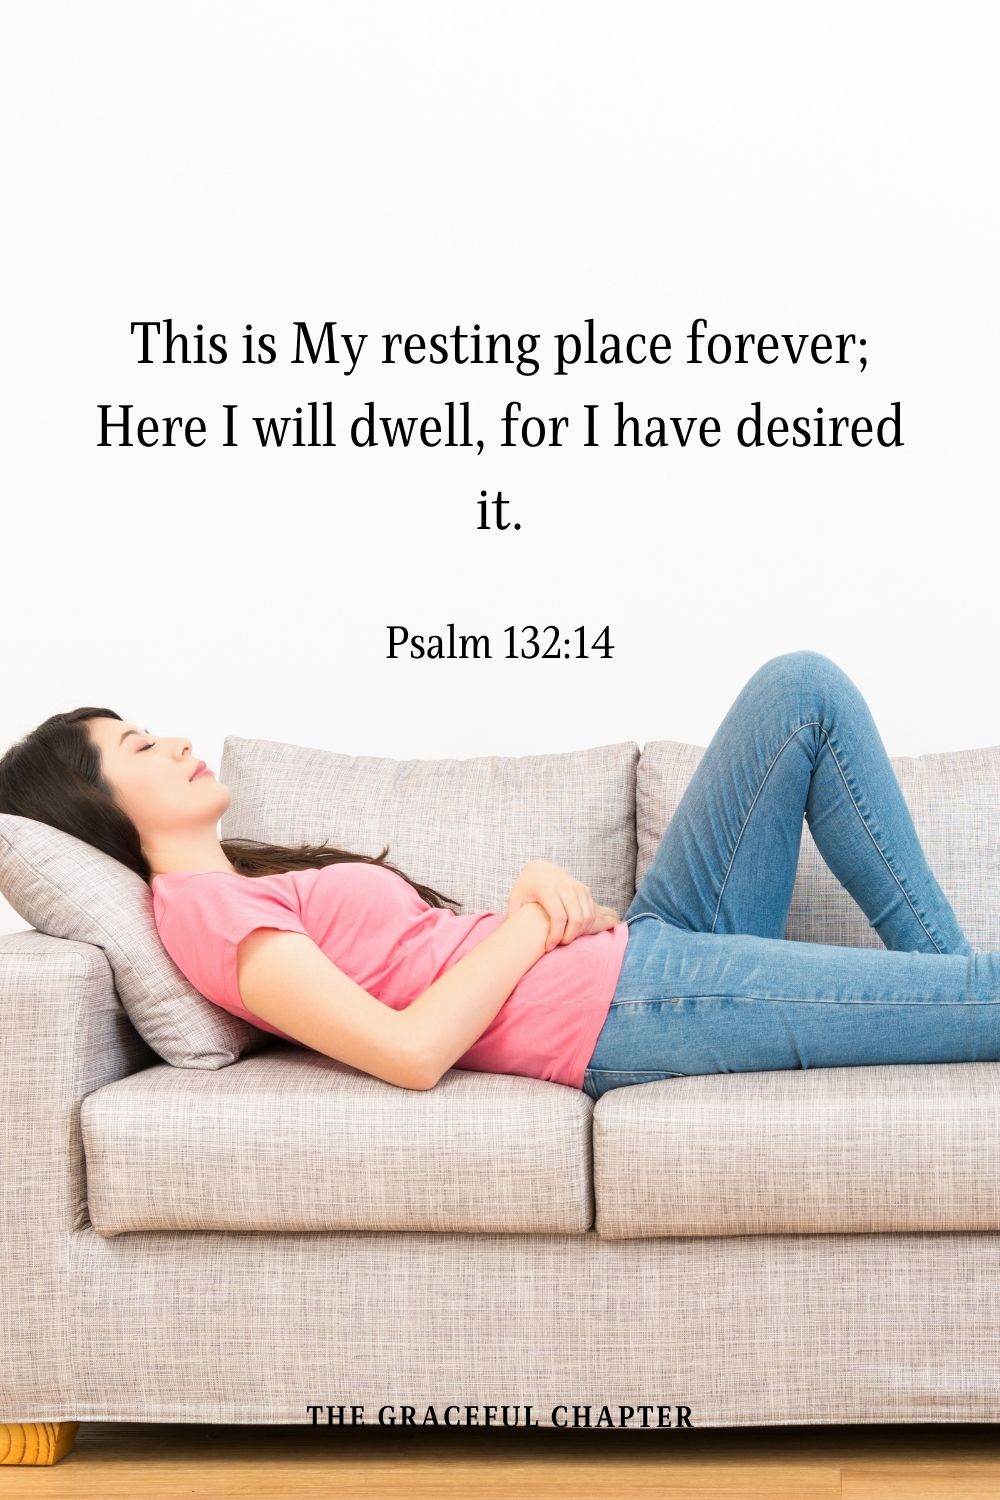 This is My resting place forever; Here I will dwell, for I have desired it.